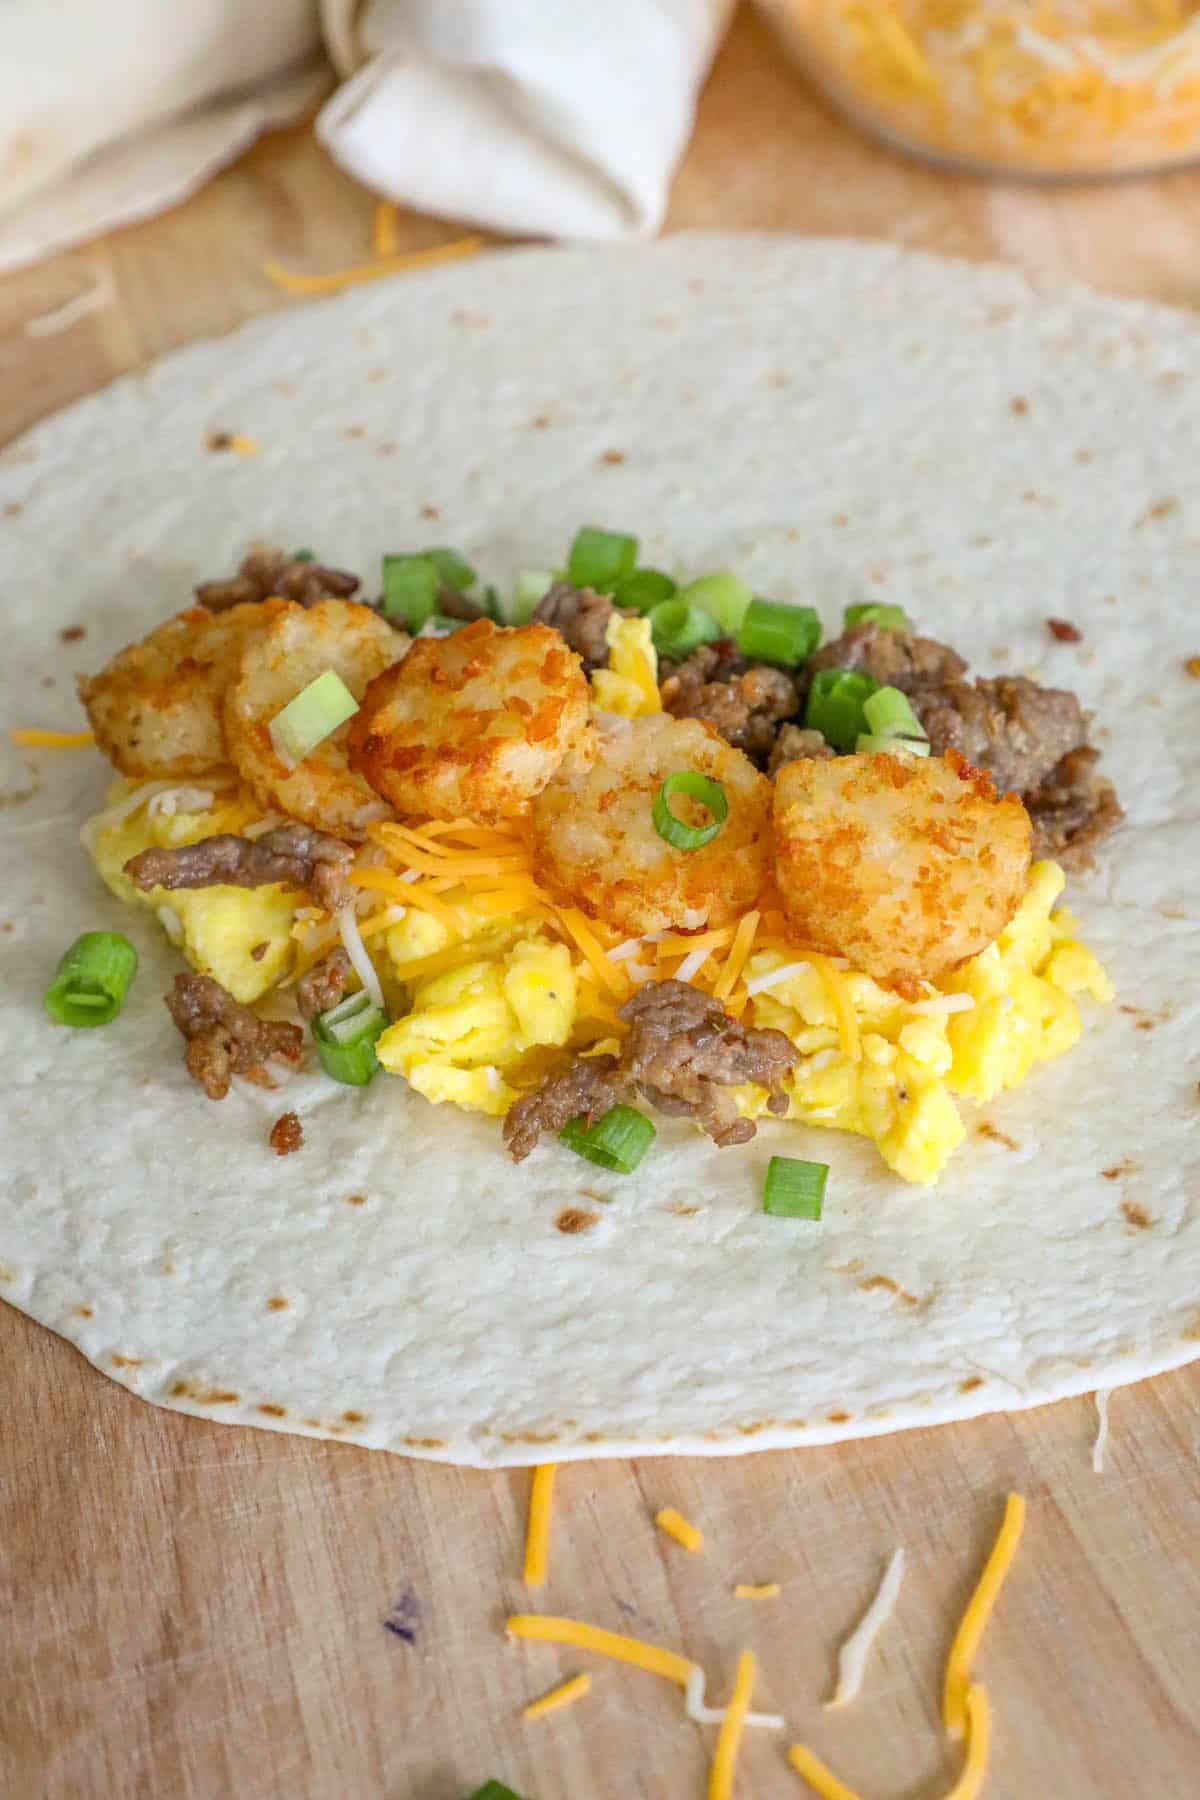 A freezer breakfast burrito with eggs, sausage, and wooden cutting board.